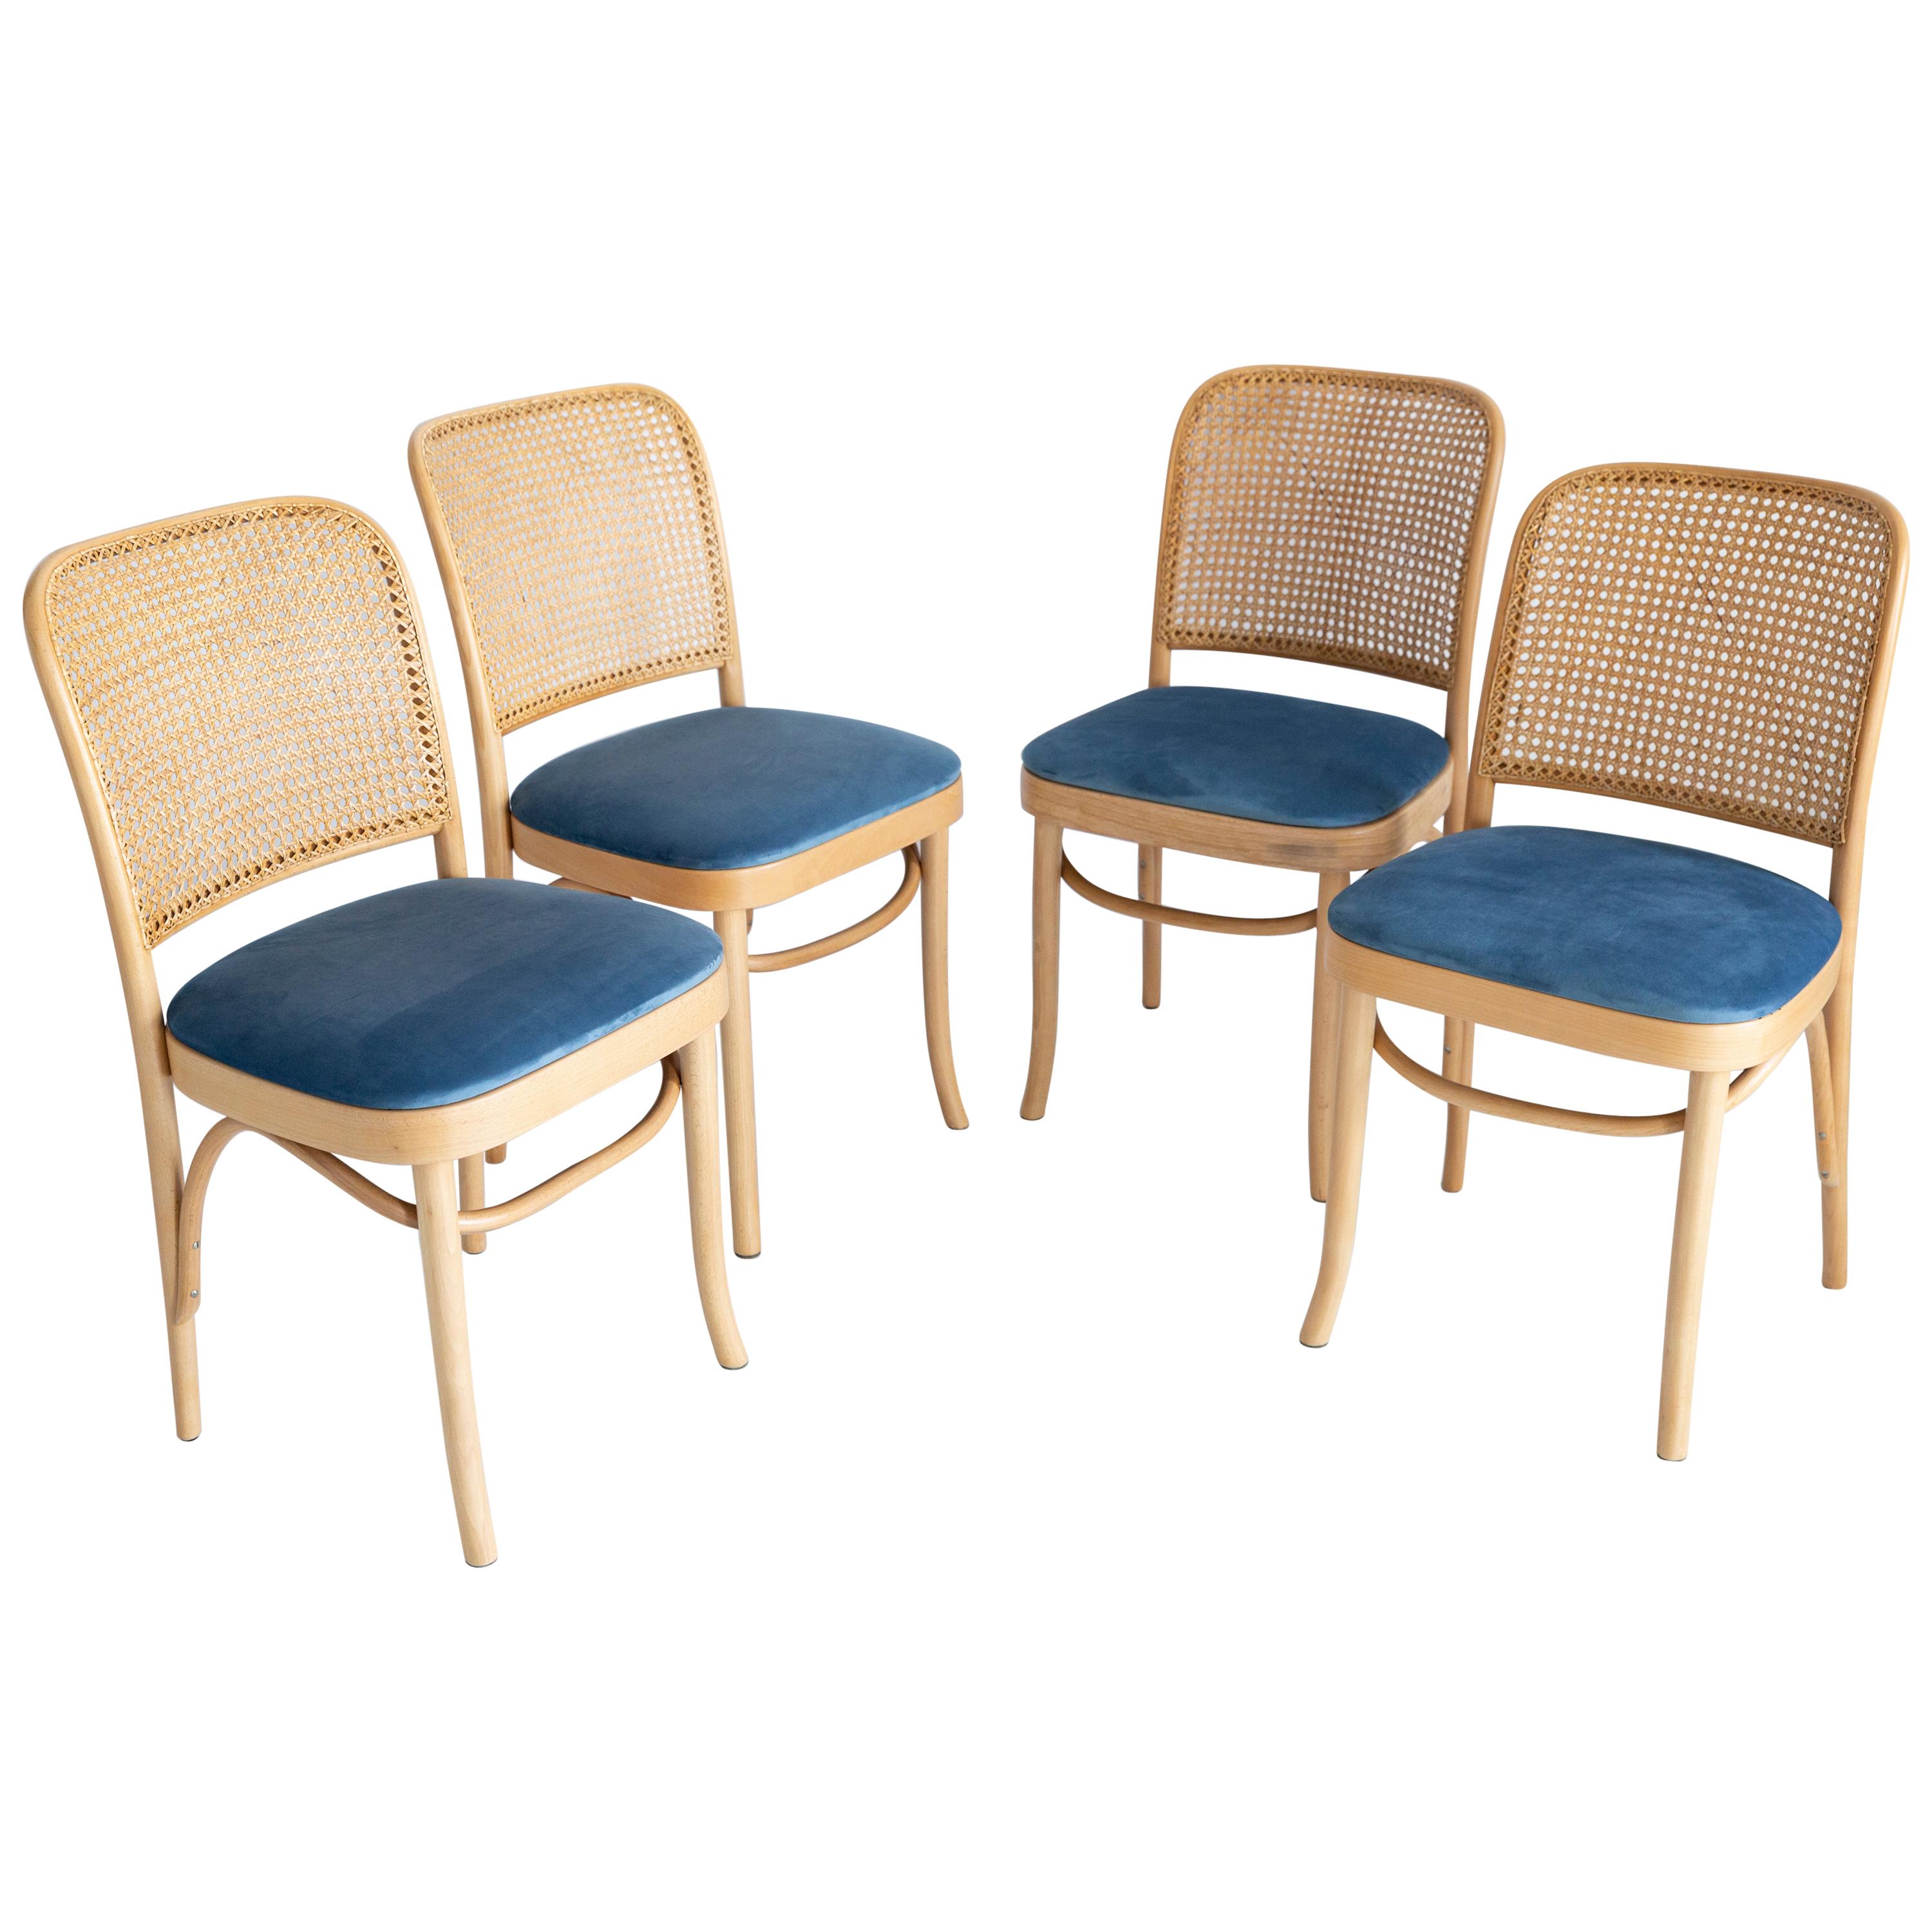 Set of Four Blue Velvet Thonet Wood Rattan Chairs, 1960s For Sale